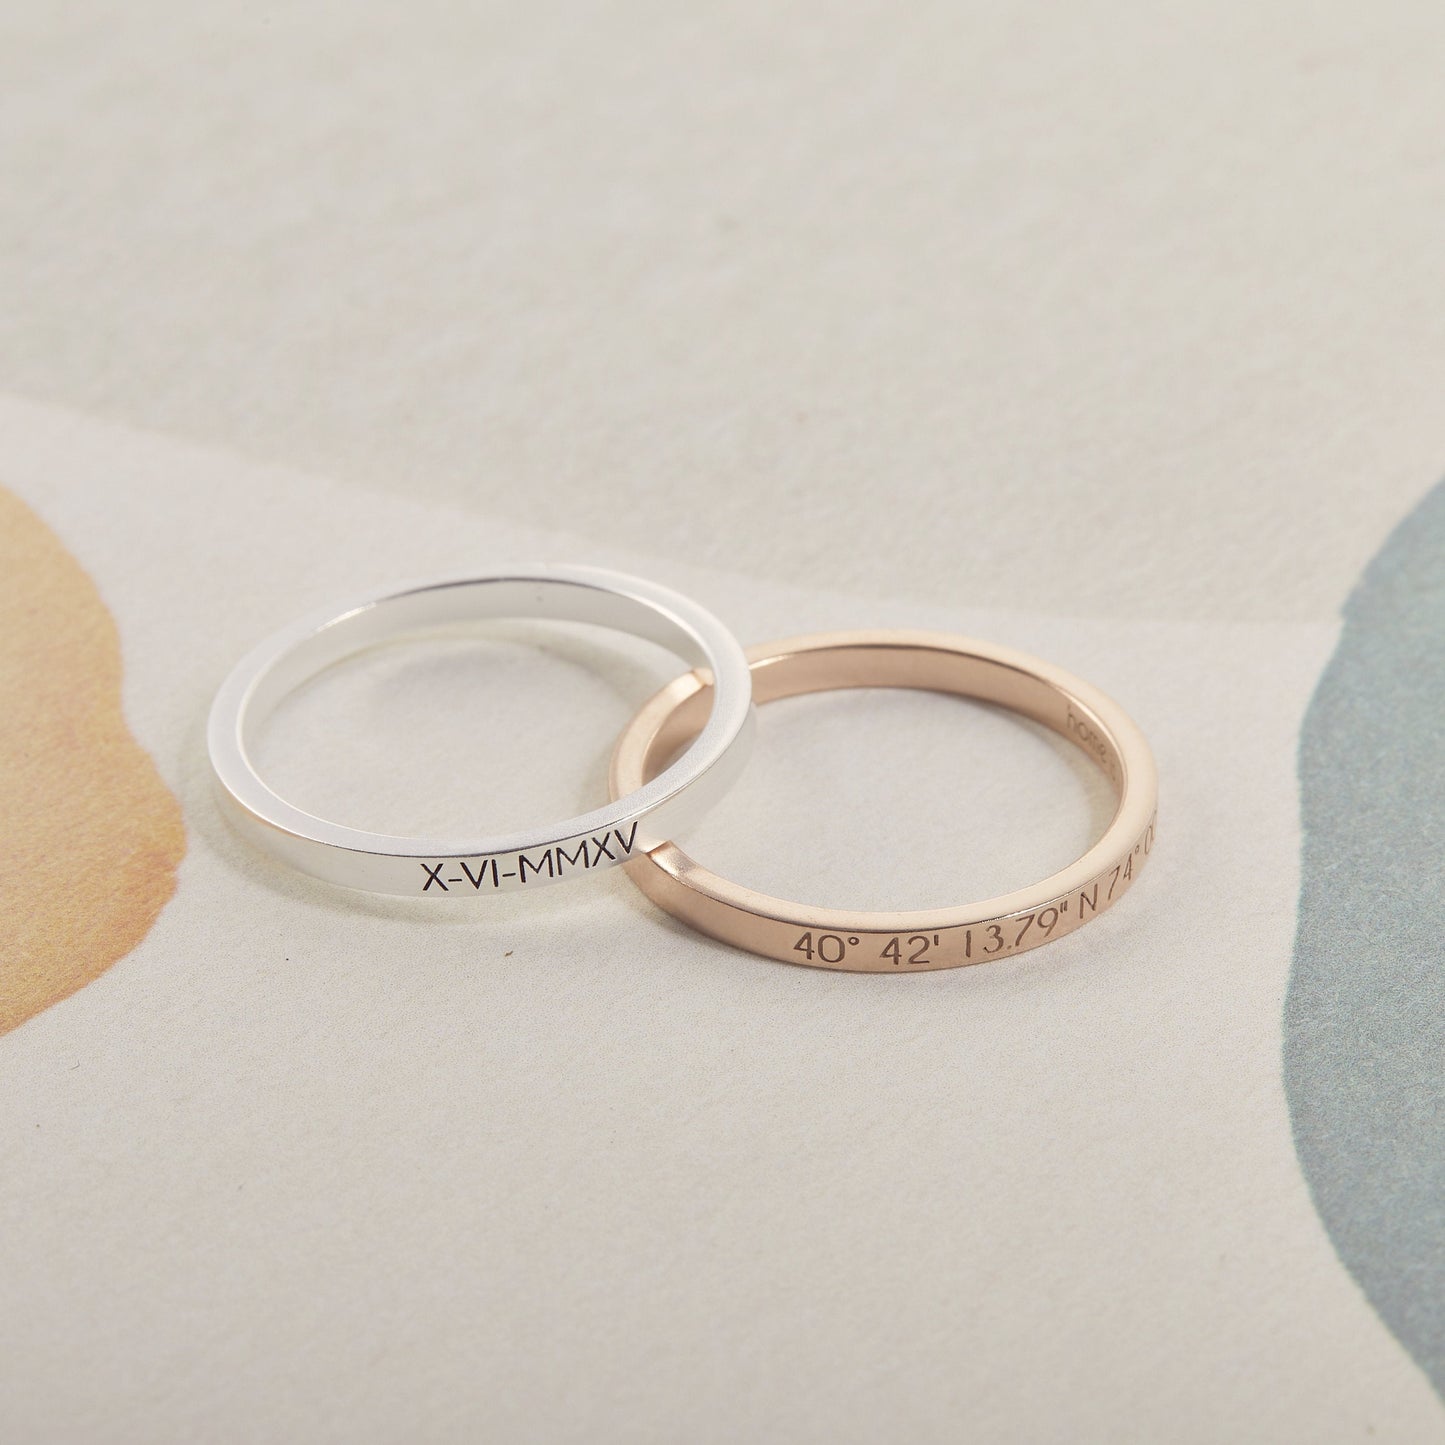 Personalized Dainty Ring